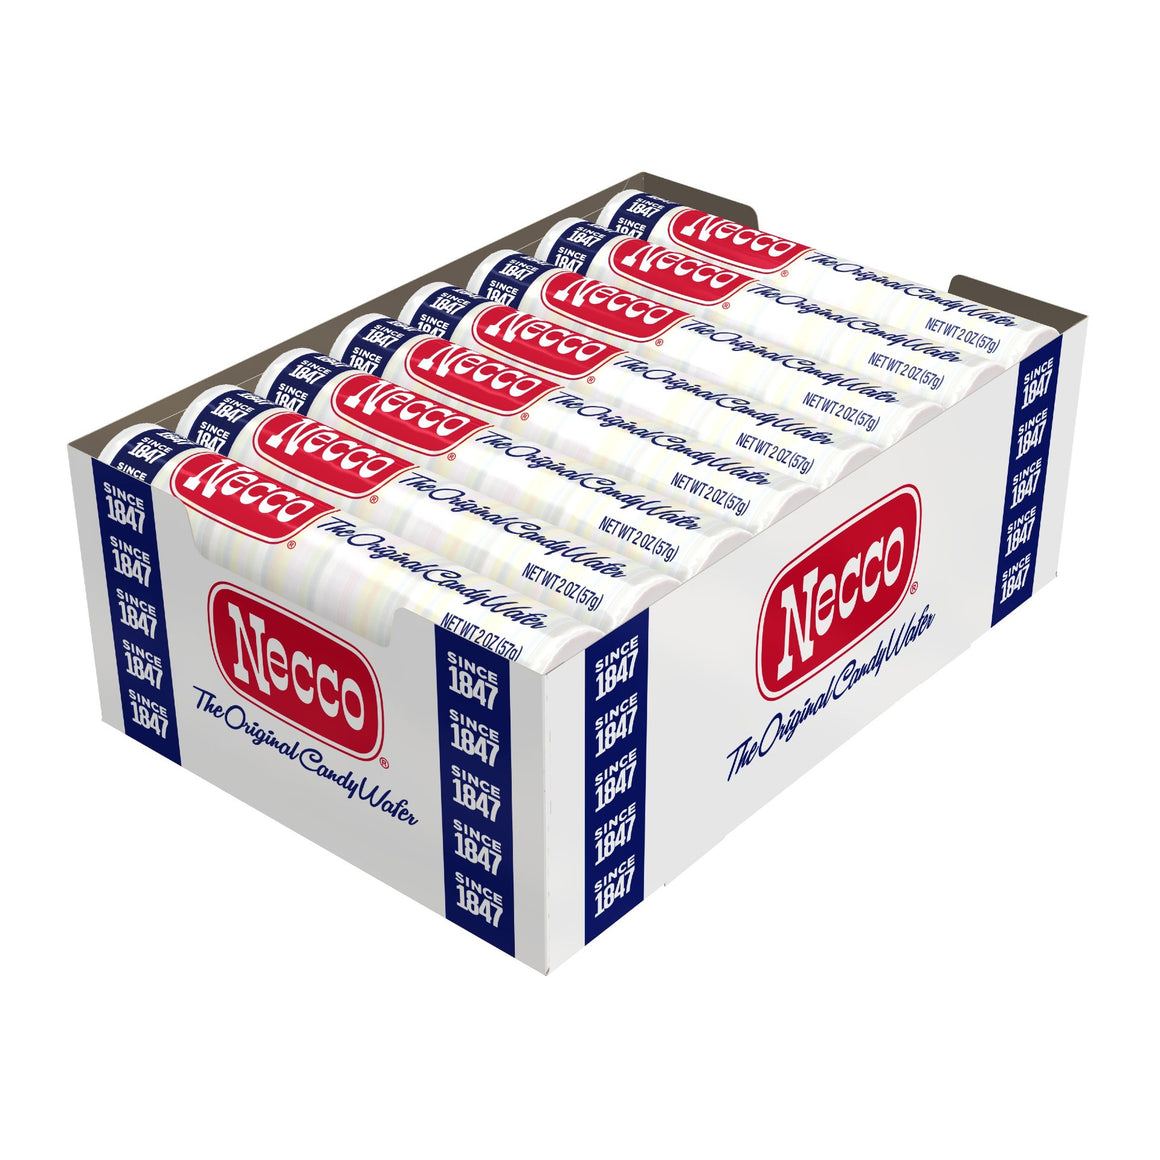 All City Candy Necco Wafers Assorted Flavors - 2-oz. Roll 1 Roll Hard Necco For fresh candy and great service, visit www.allcitycandy.com